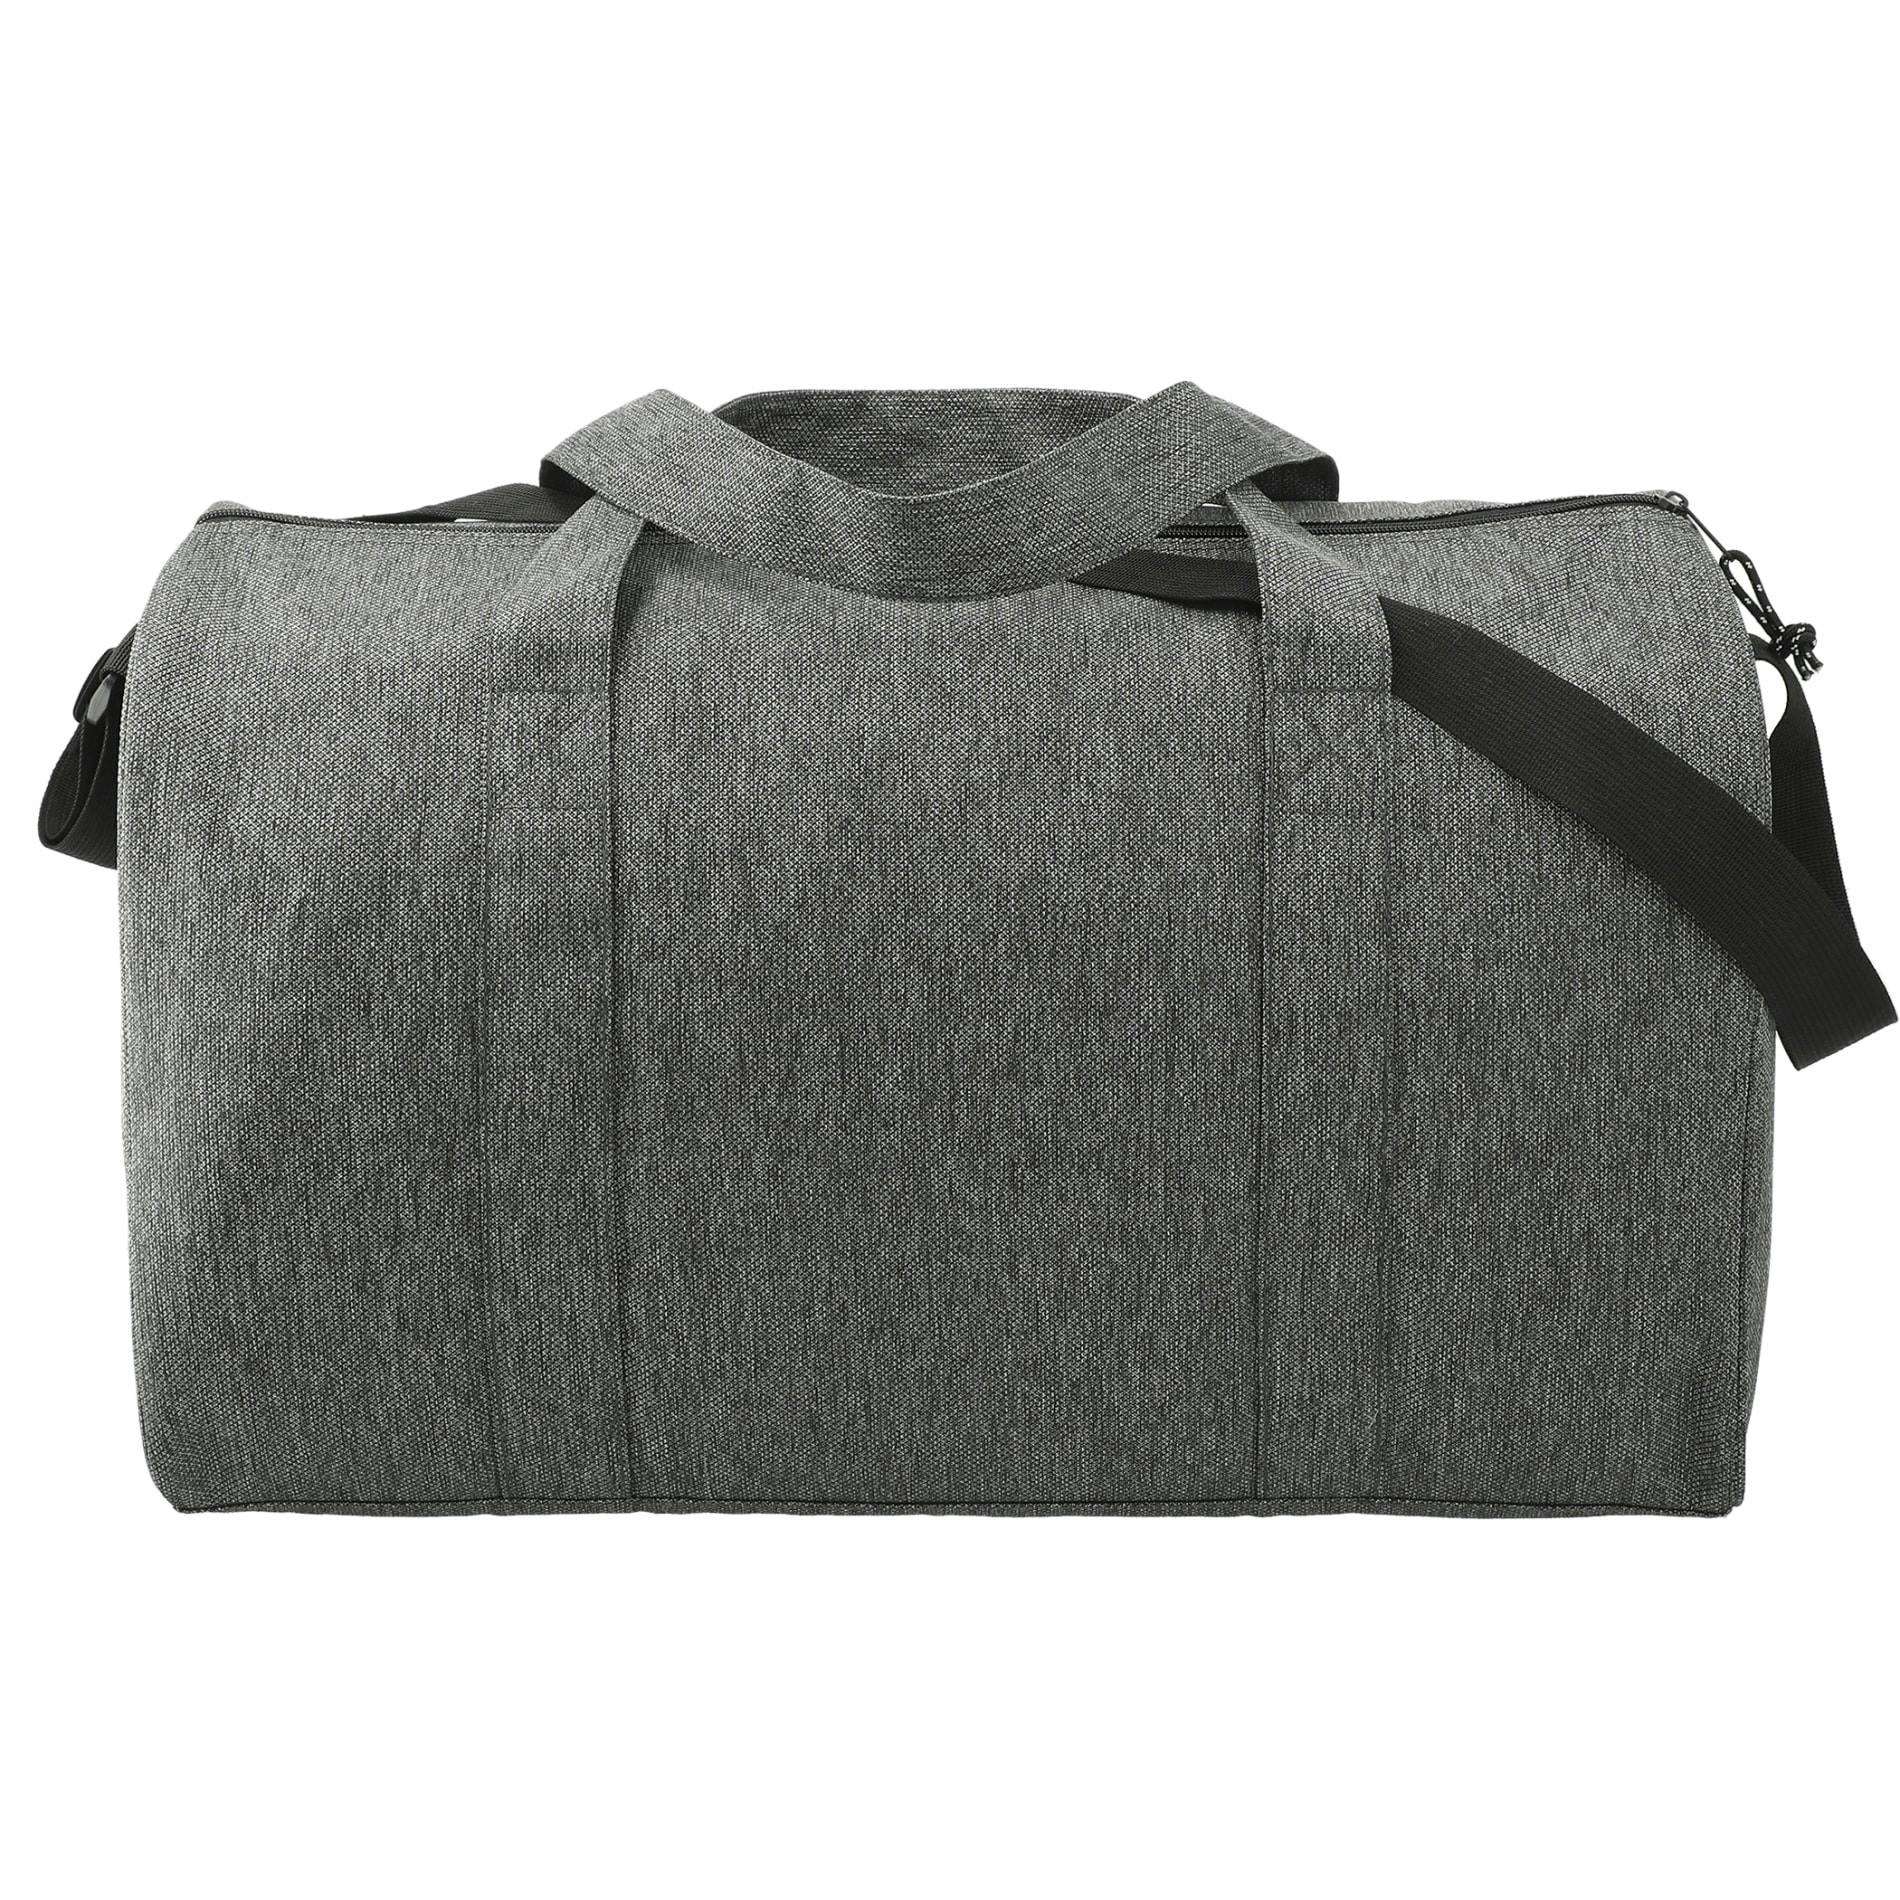 Vila Recycled Executive Duffel - additional Image 6